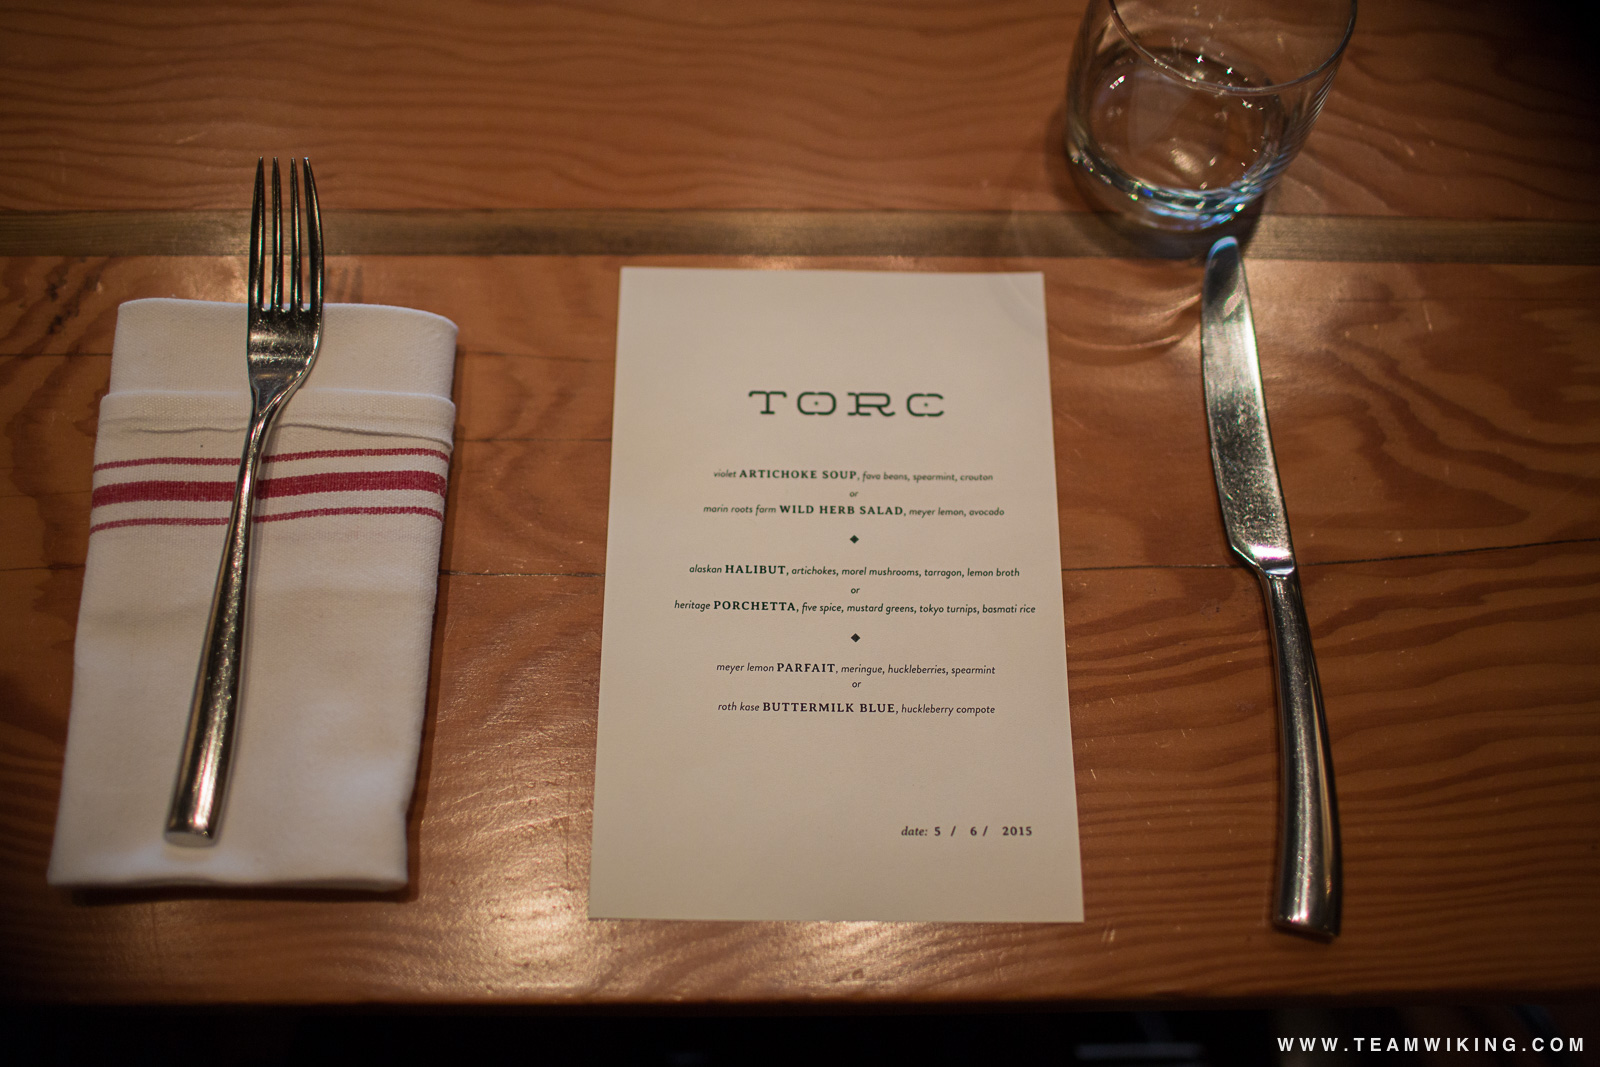 Torc in Downtown Napa